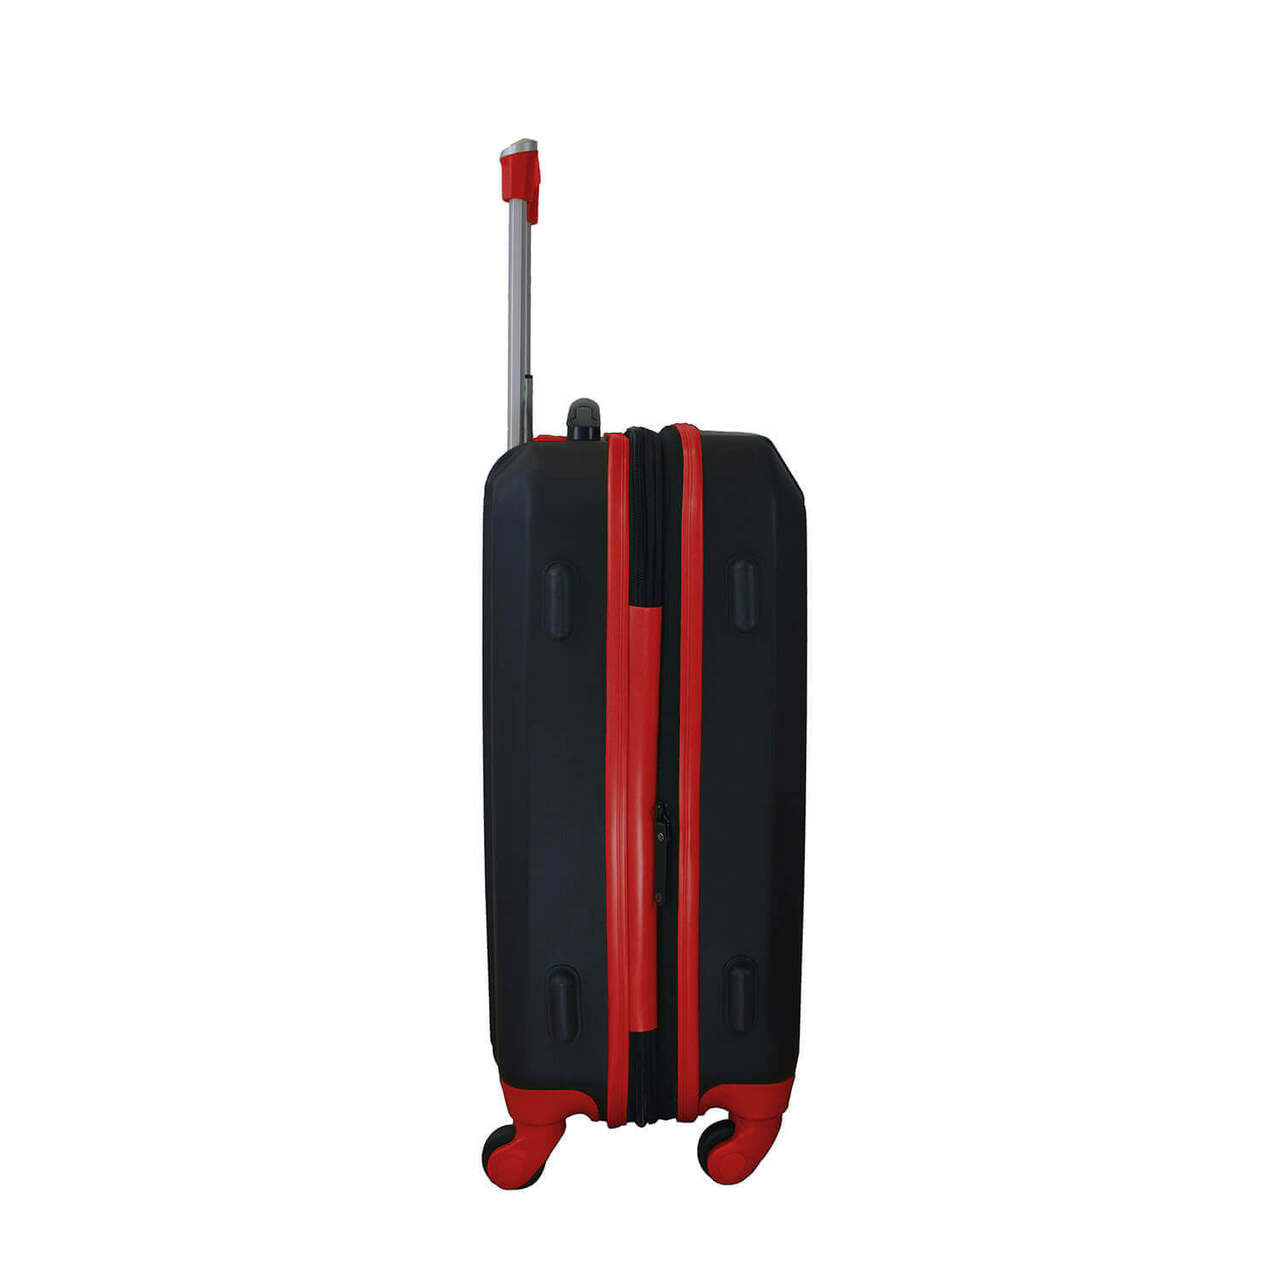 Devils Carry On Spinner Luggage | New Jersey Devils Hardcase Two-Tone Luggage Carry-on Spinner in Red